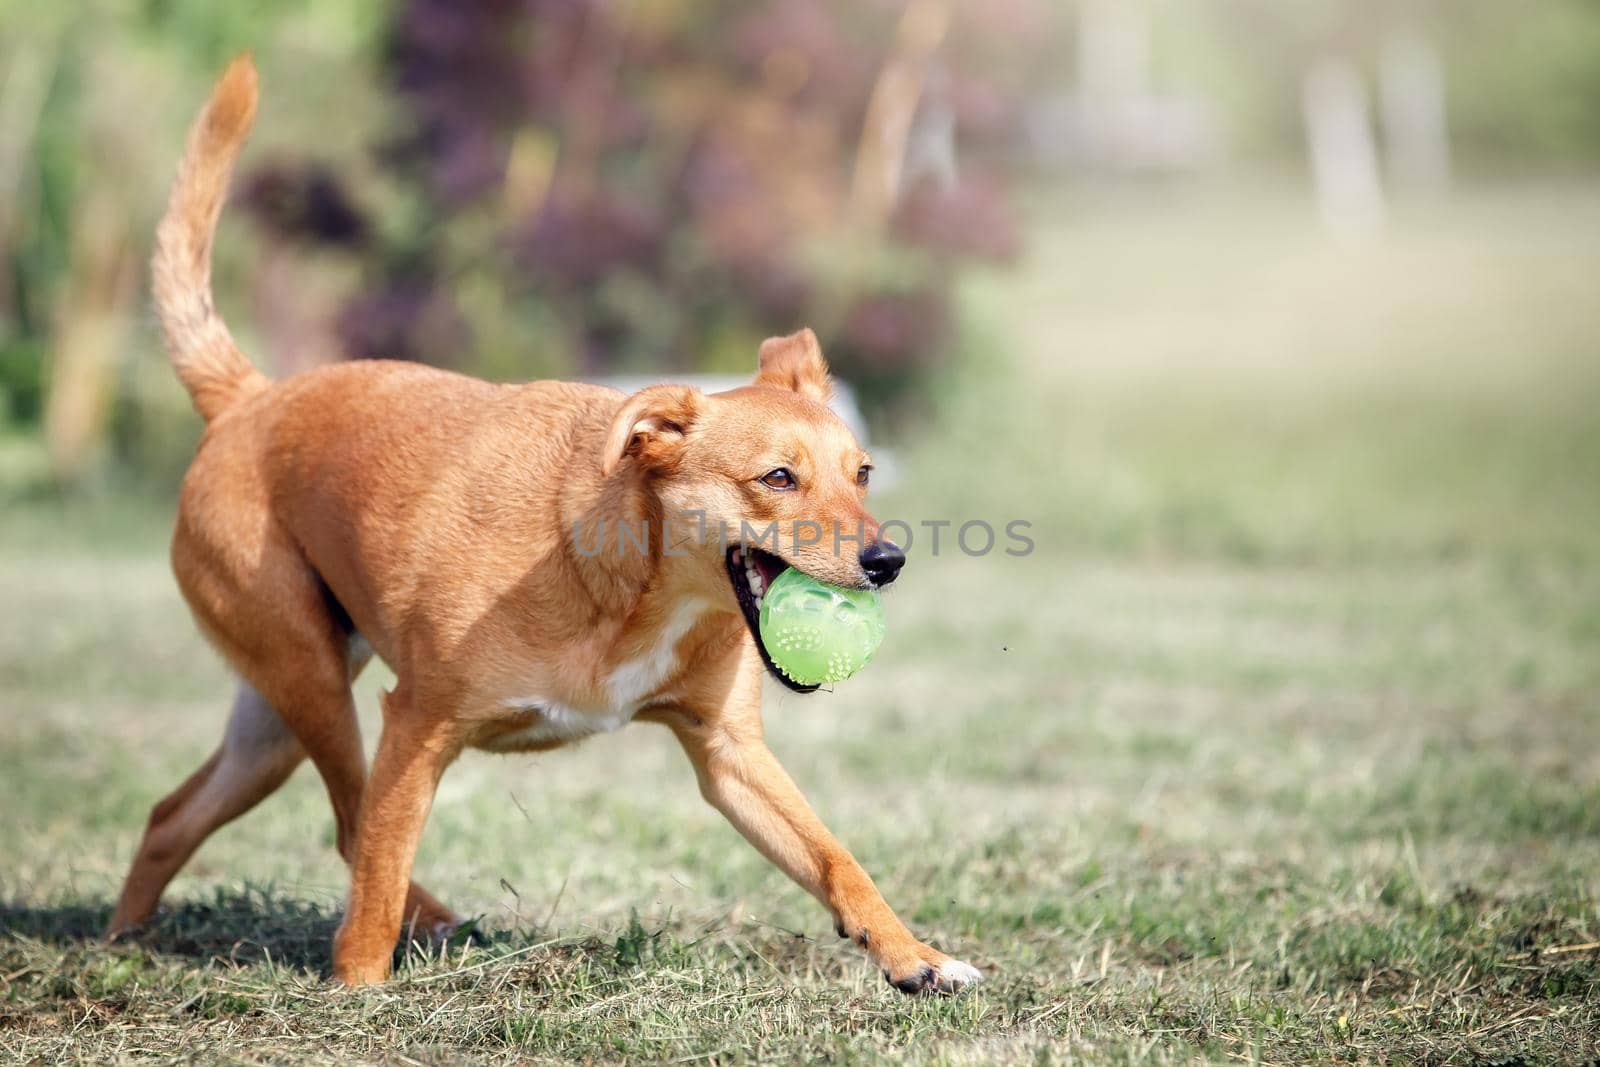 Nice ginger dog with a ball in mouth is running through a garden with a green lawn by Lincikas